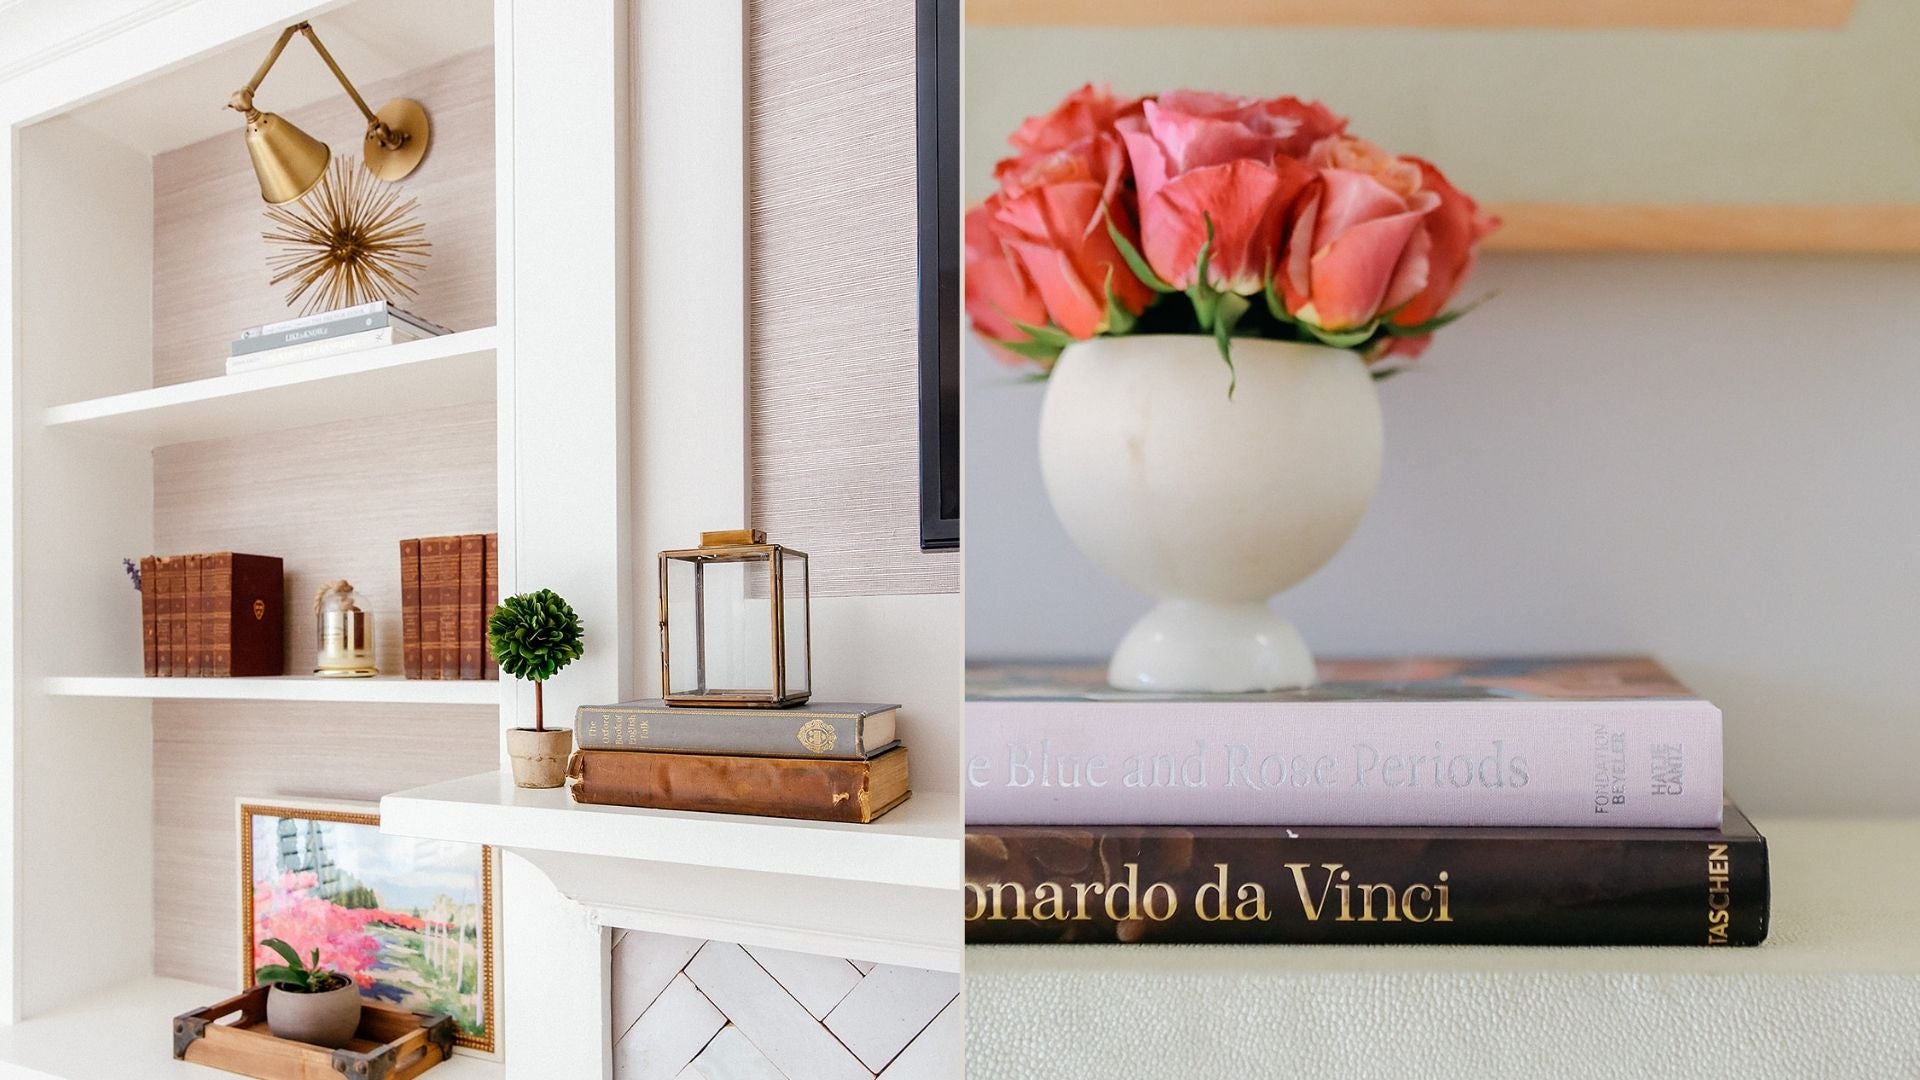 5 ways for styling your home with books - collage showing books and other decorative elements on built in shelving and second photo with a vase stacked on two books